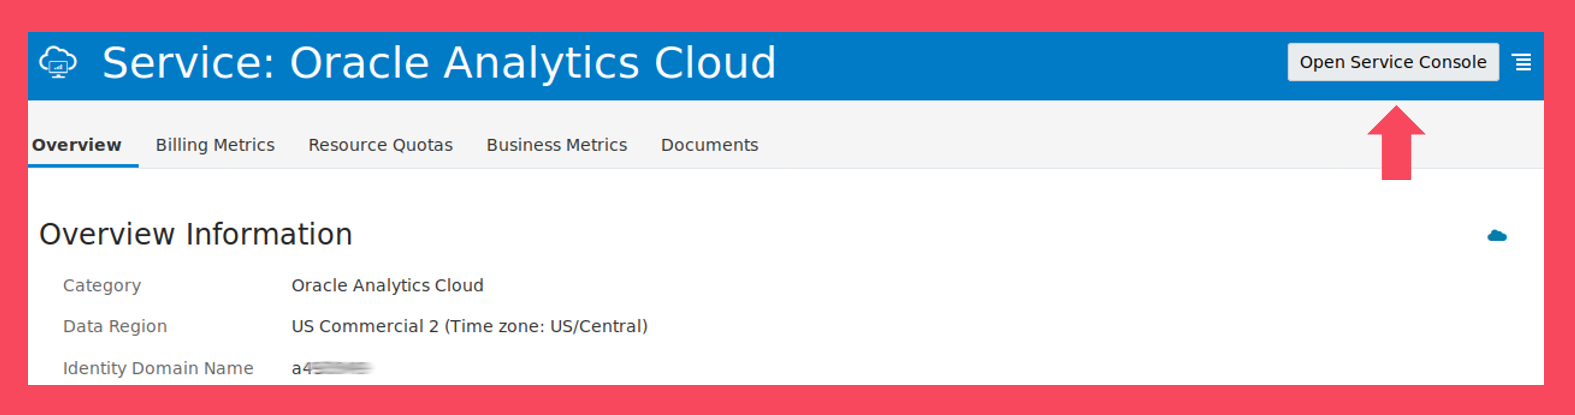 setting-up-oracle-analytics-cloud-step-2-create-a-service-instance-devoteam